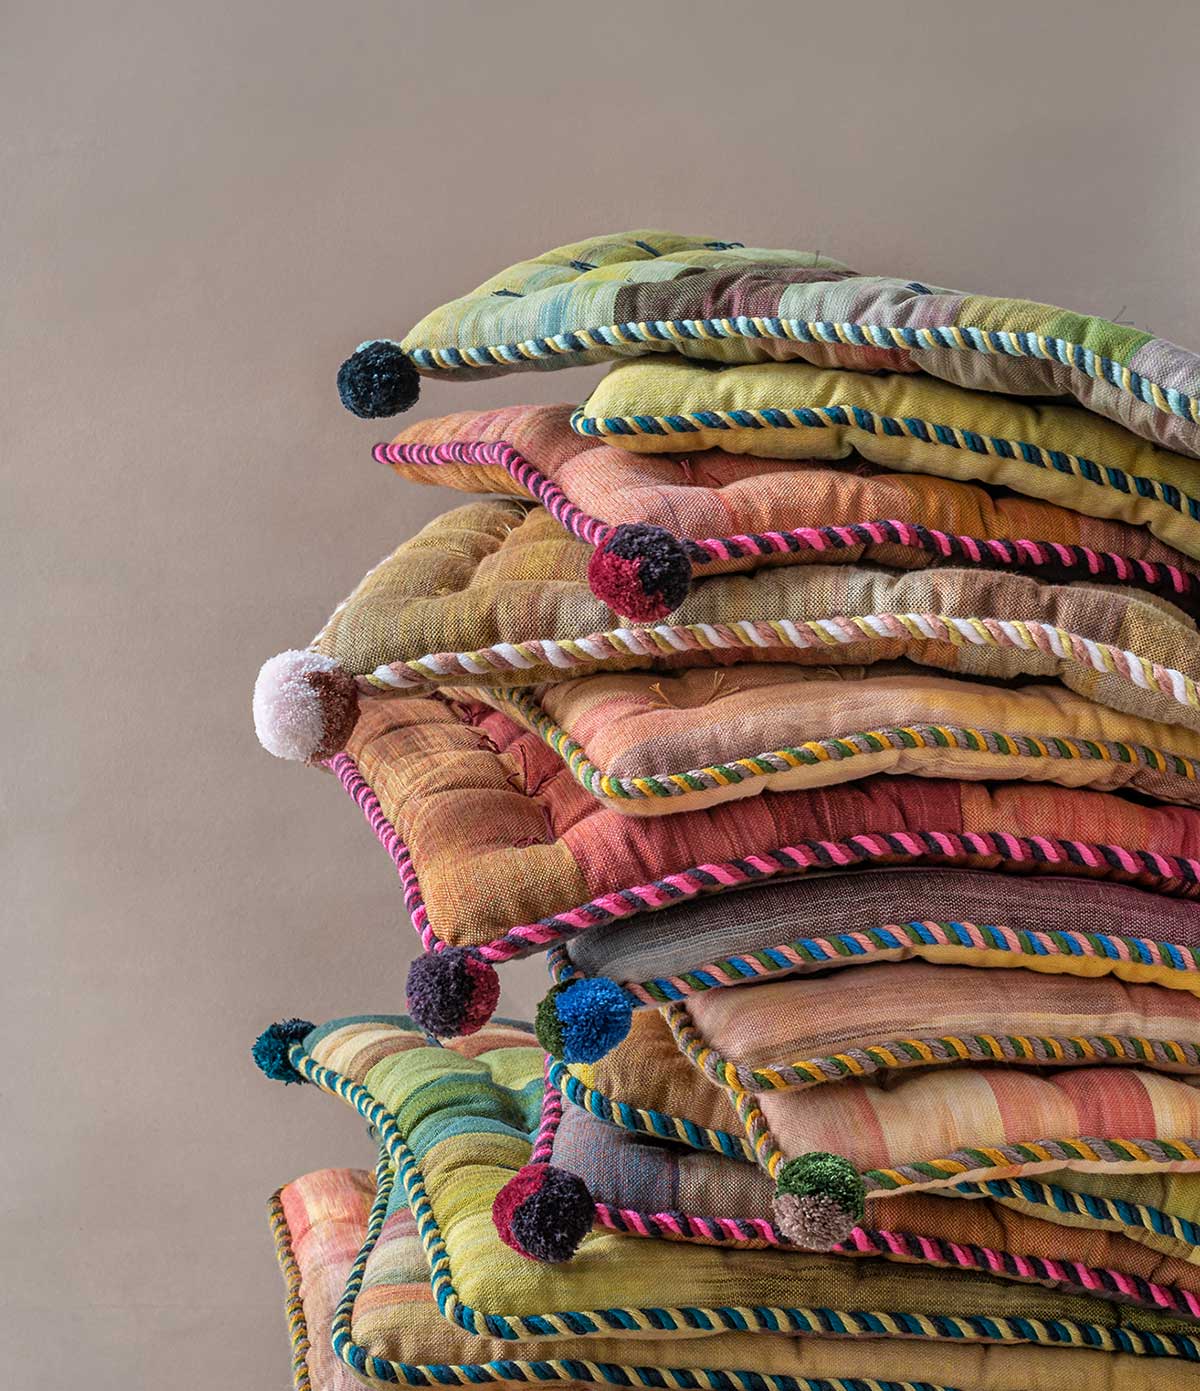 Laneh colorful Silk road seat pads stacked on top of each other